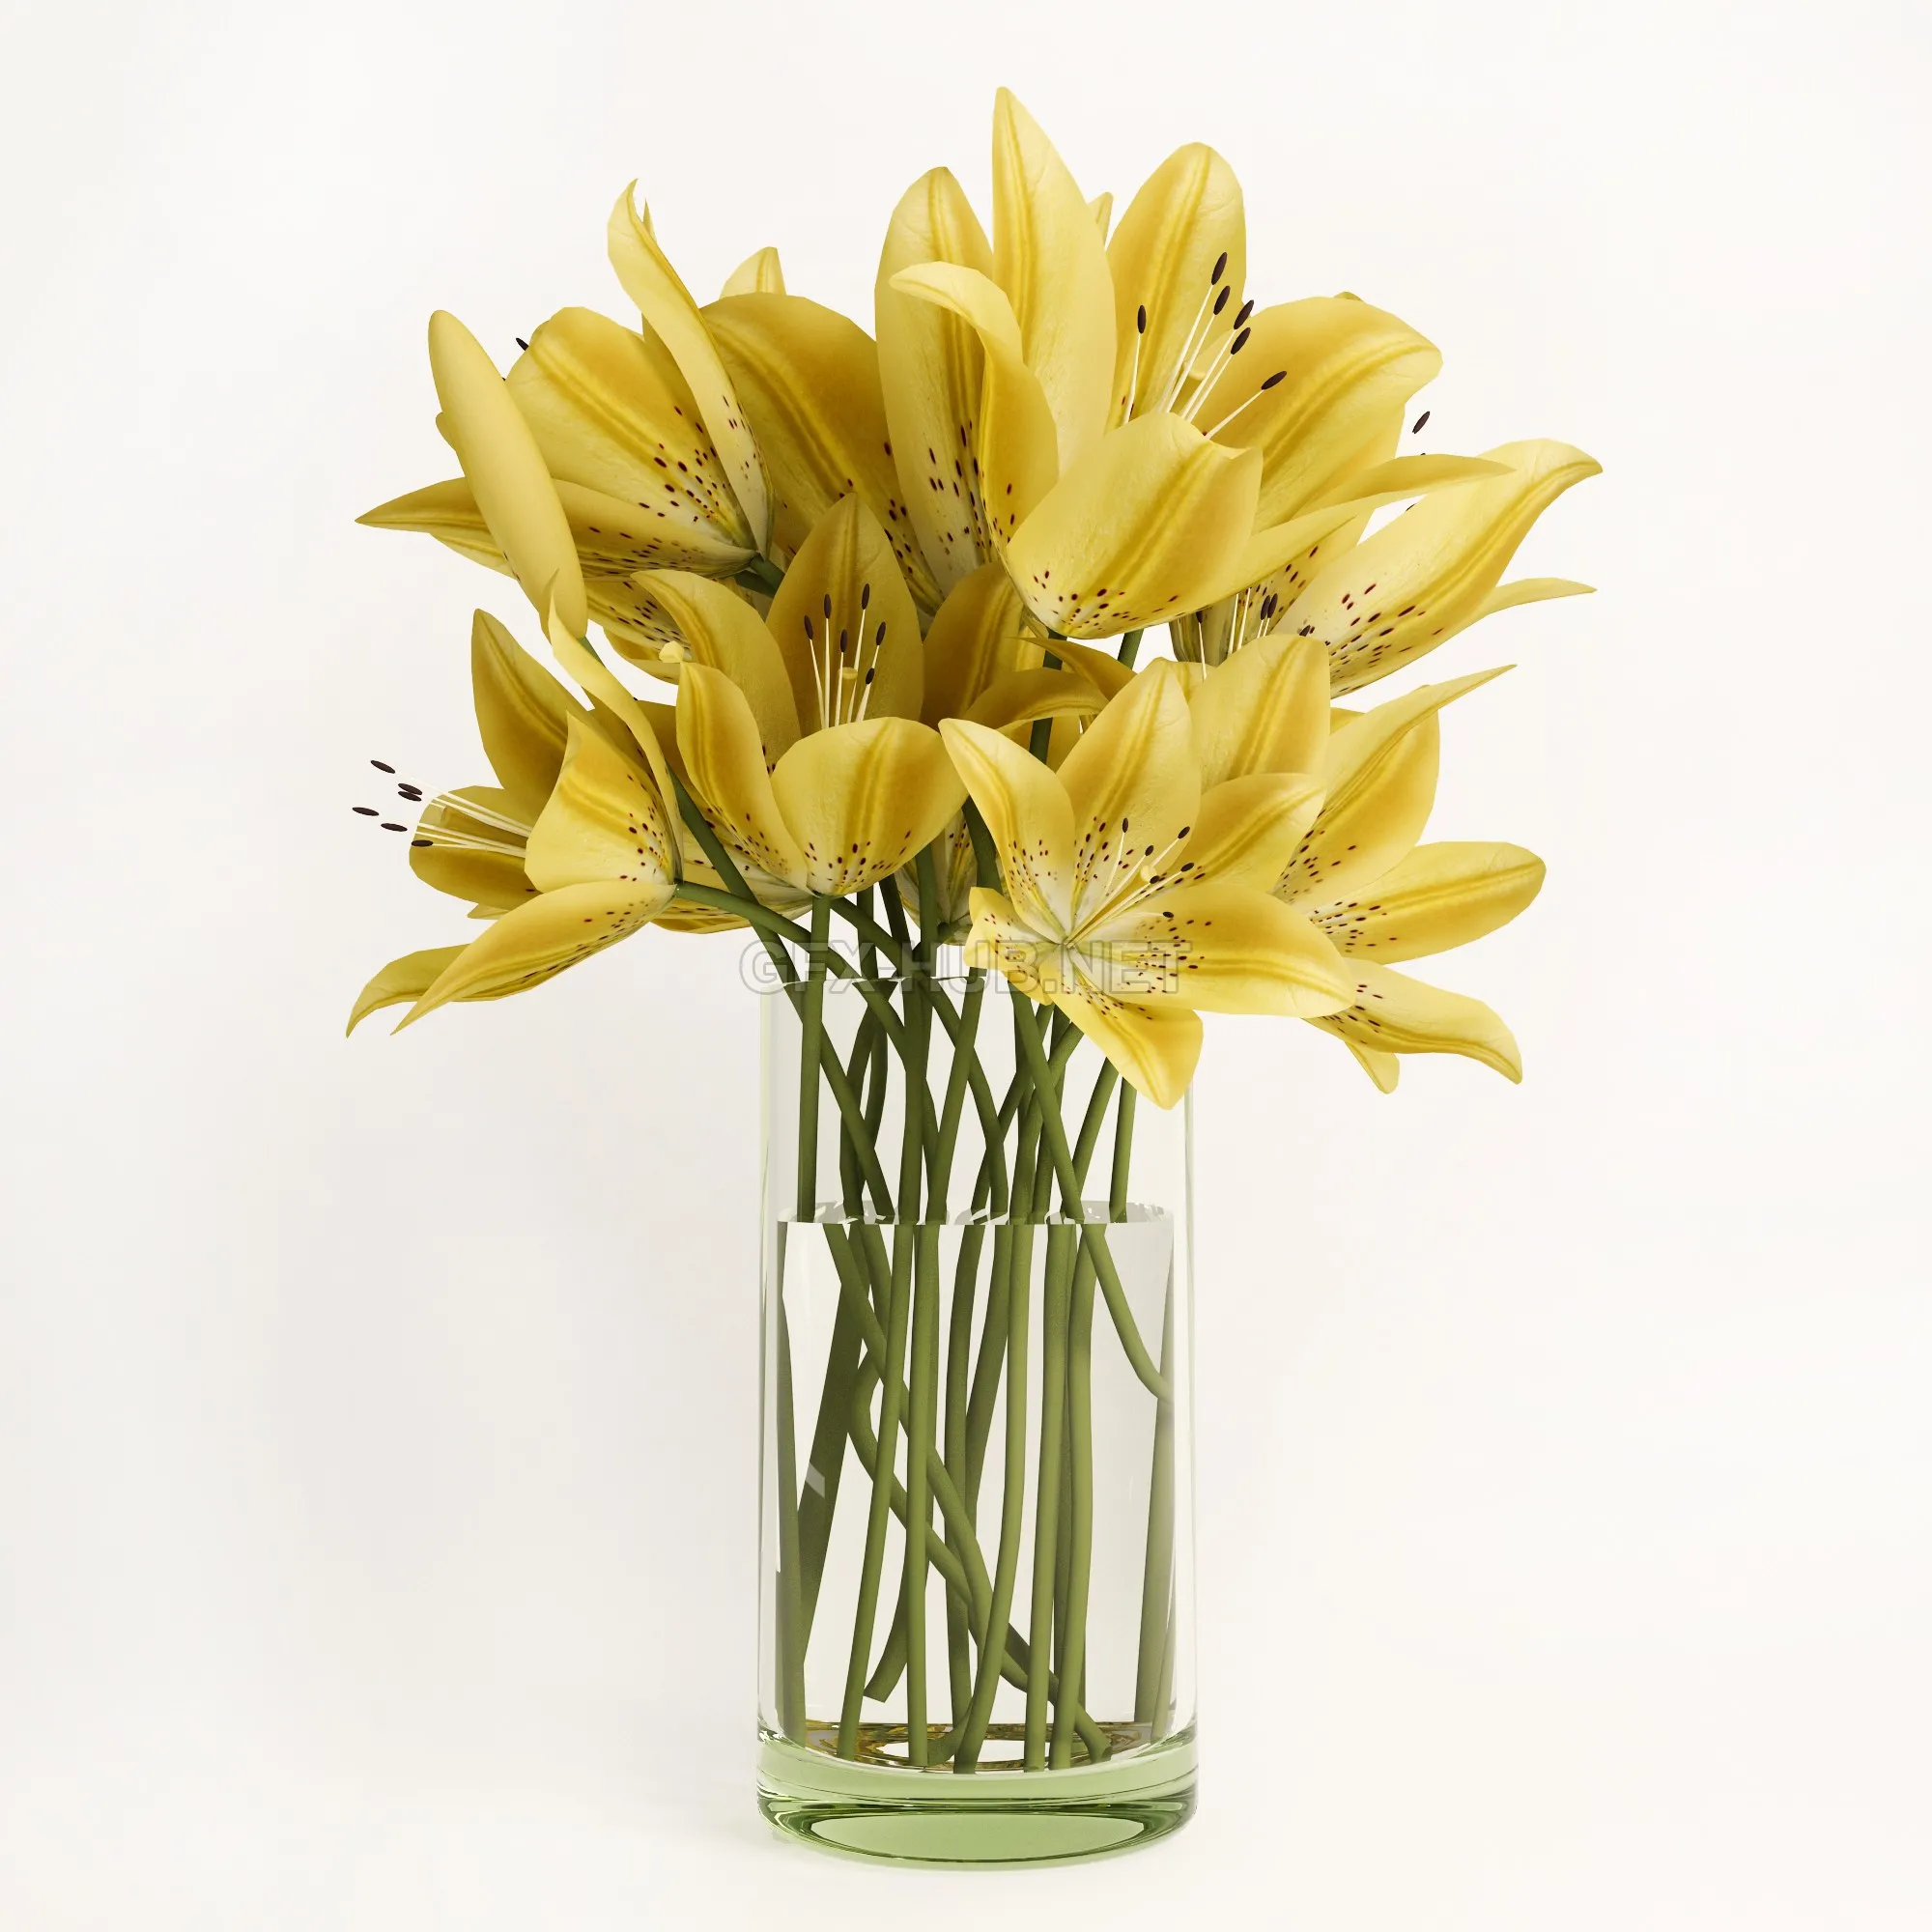 Amb_Bouquet of yellow lilies – 205637